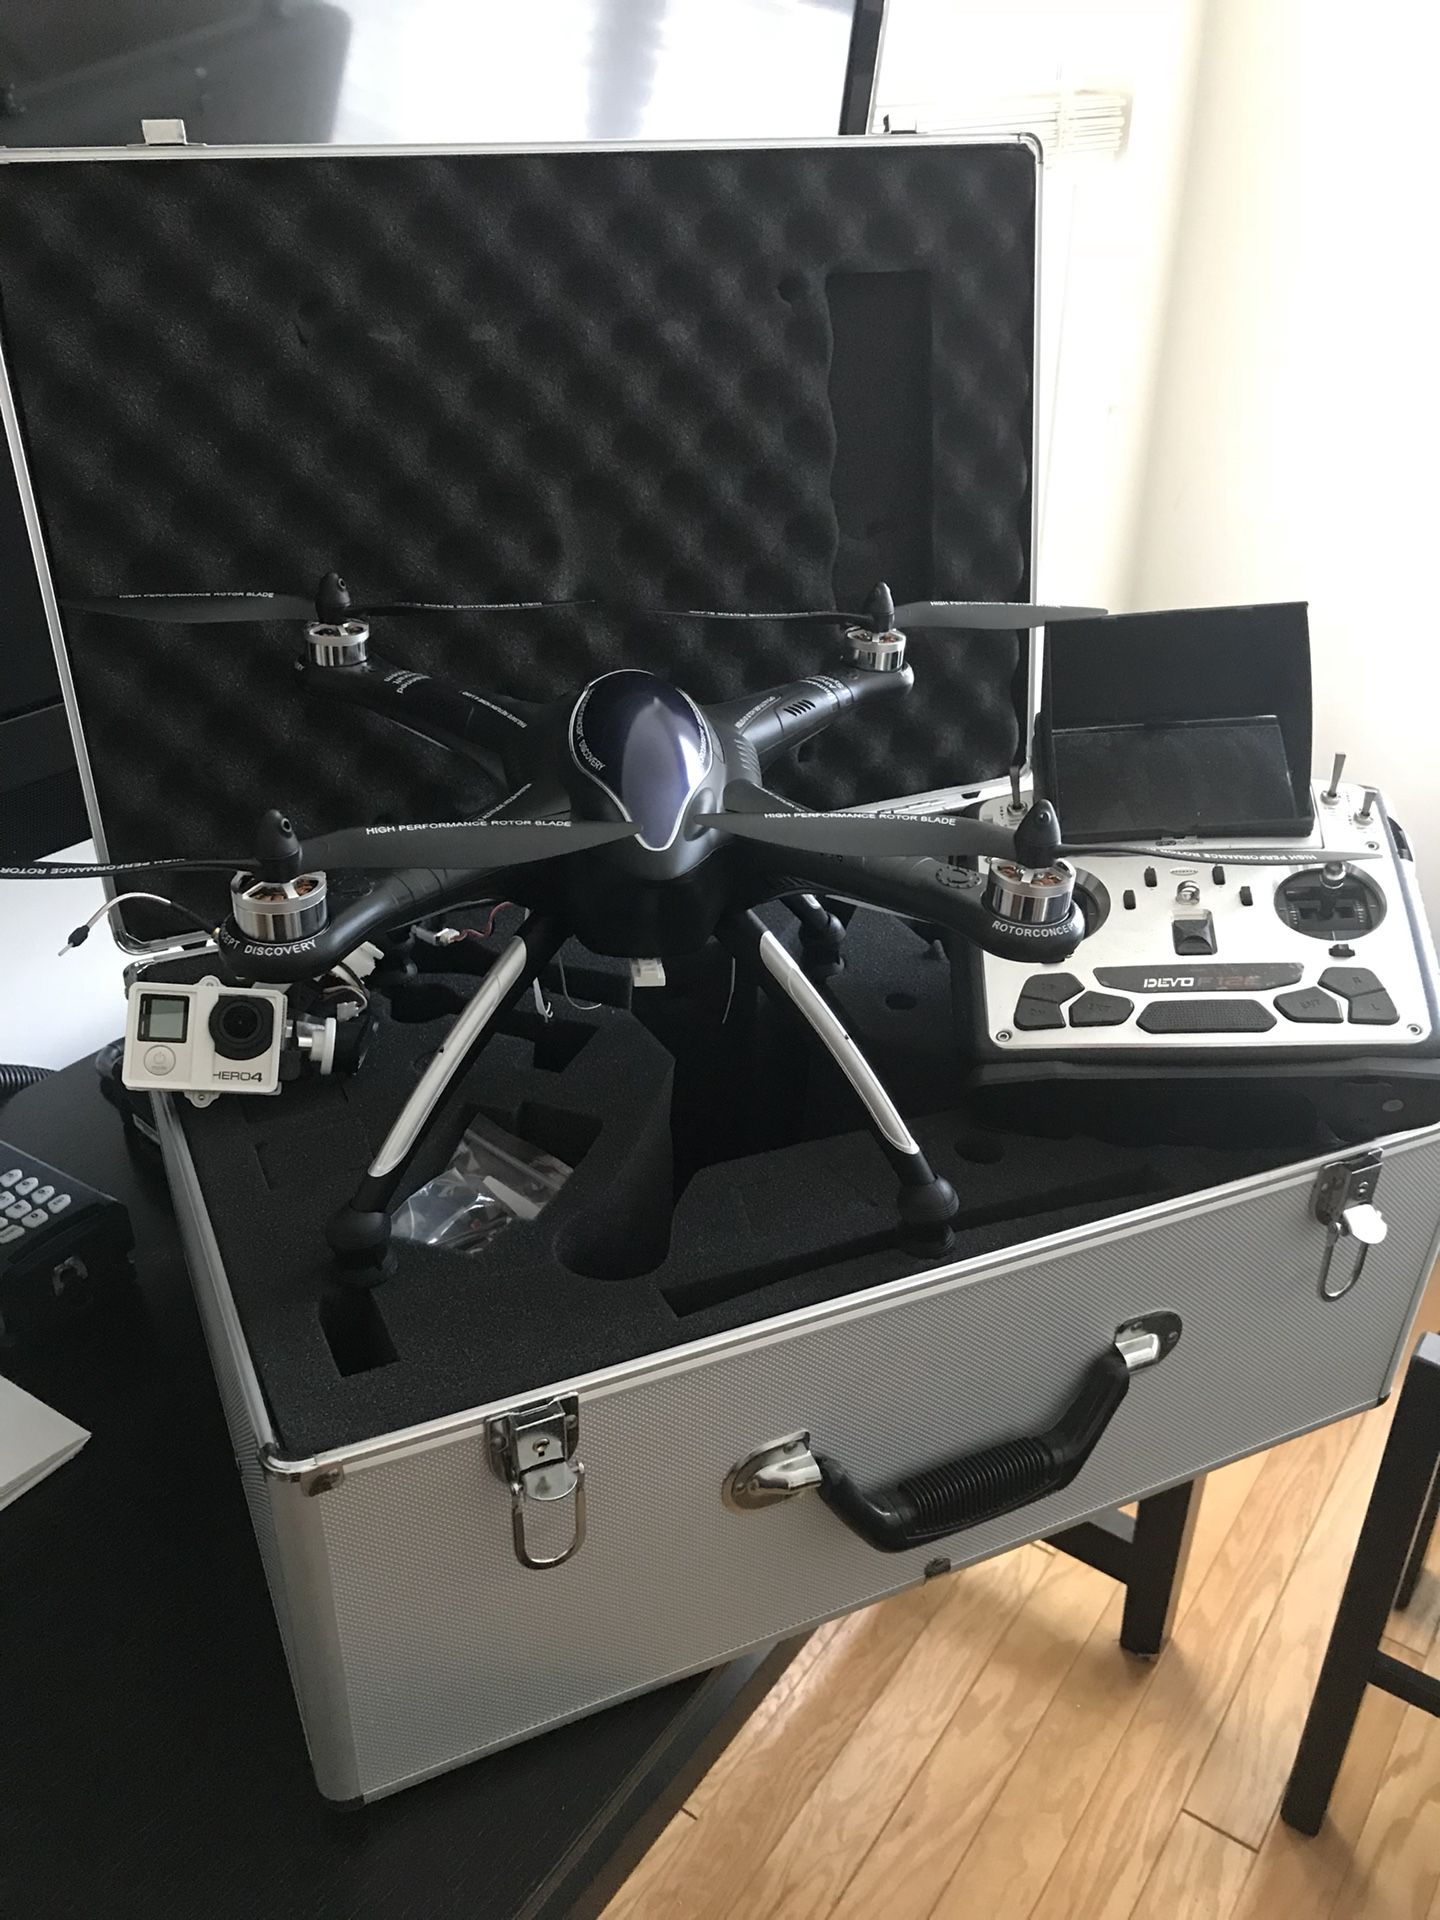 New Drone with GoPro cam and display control